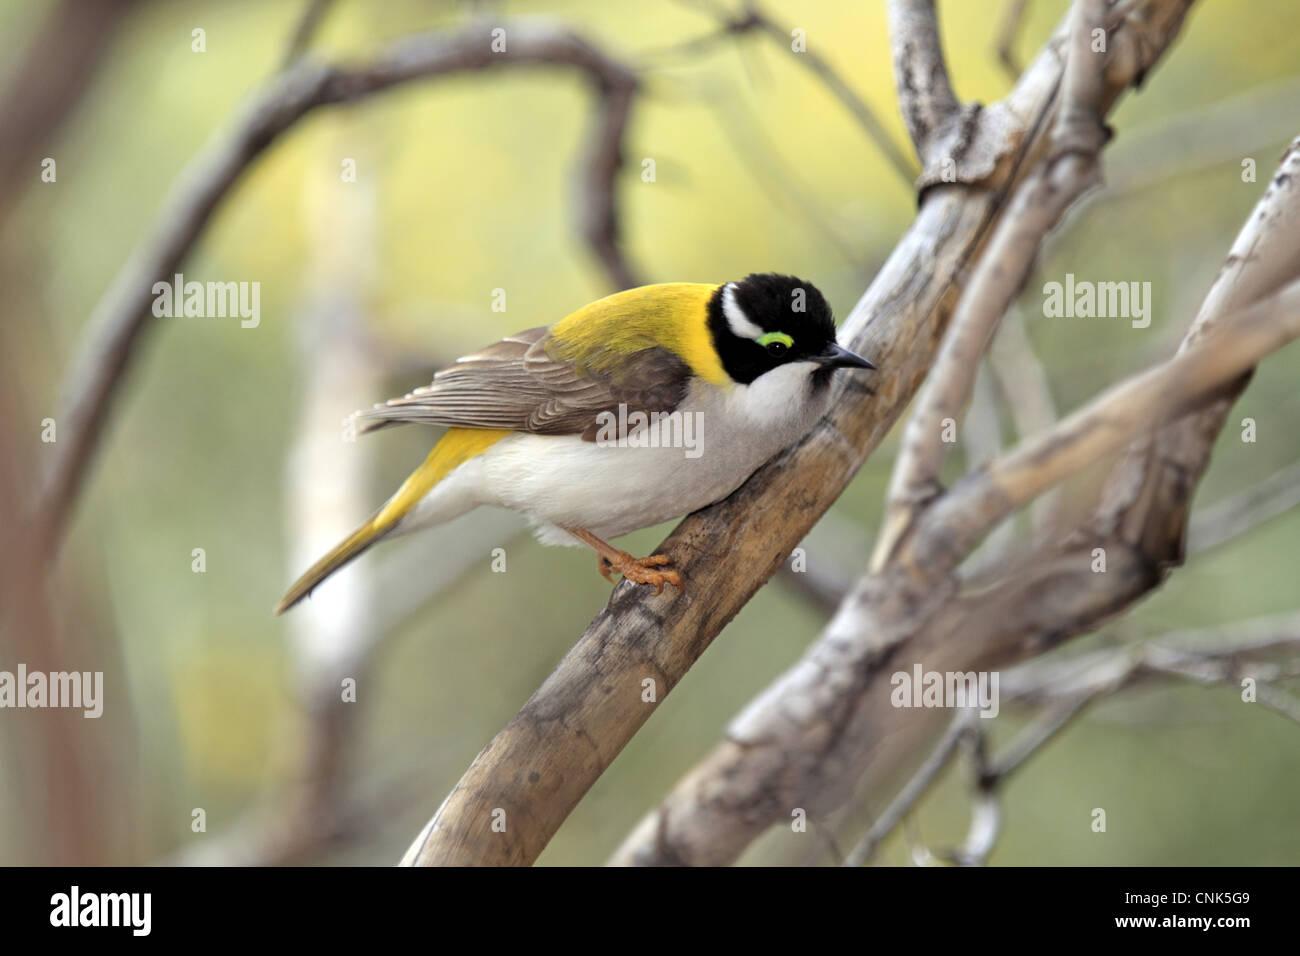 Golden-backed Honeyeater (Melithreptus gularis laetior) adult, perched on branch, Outback, Northern Territory, Australia Stock Photo